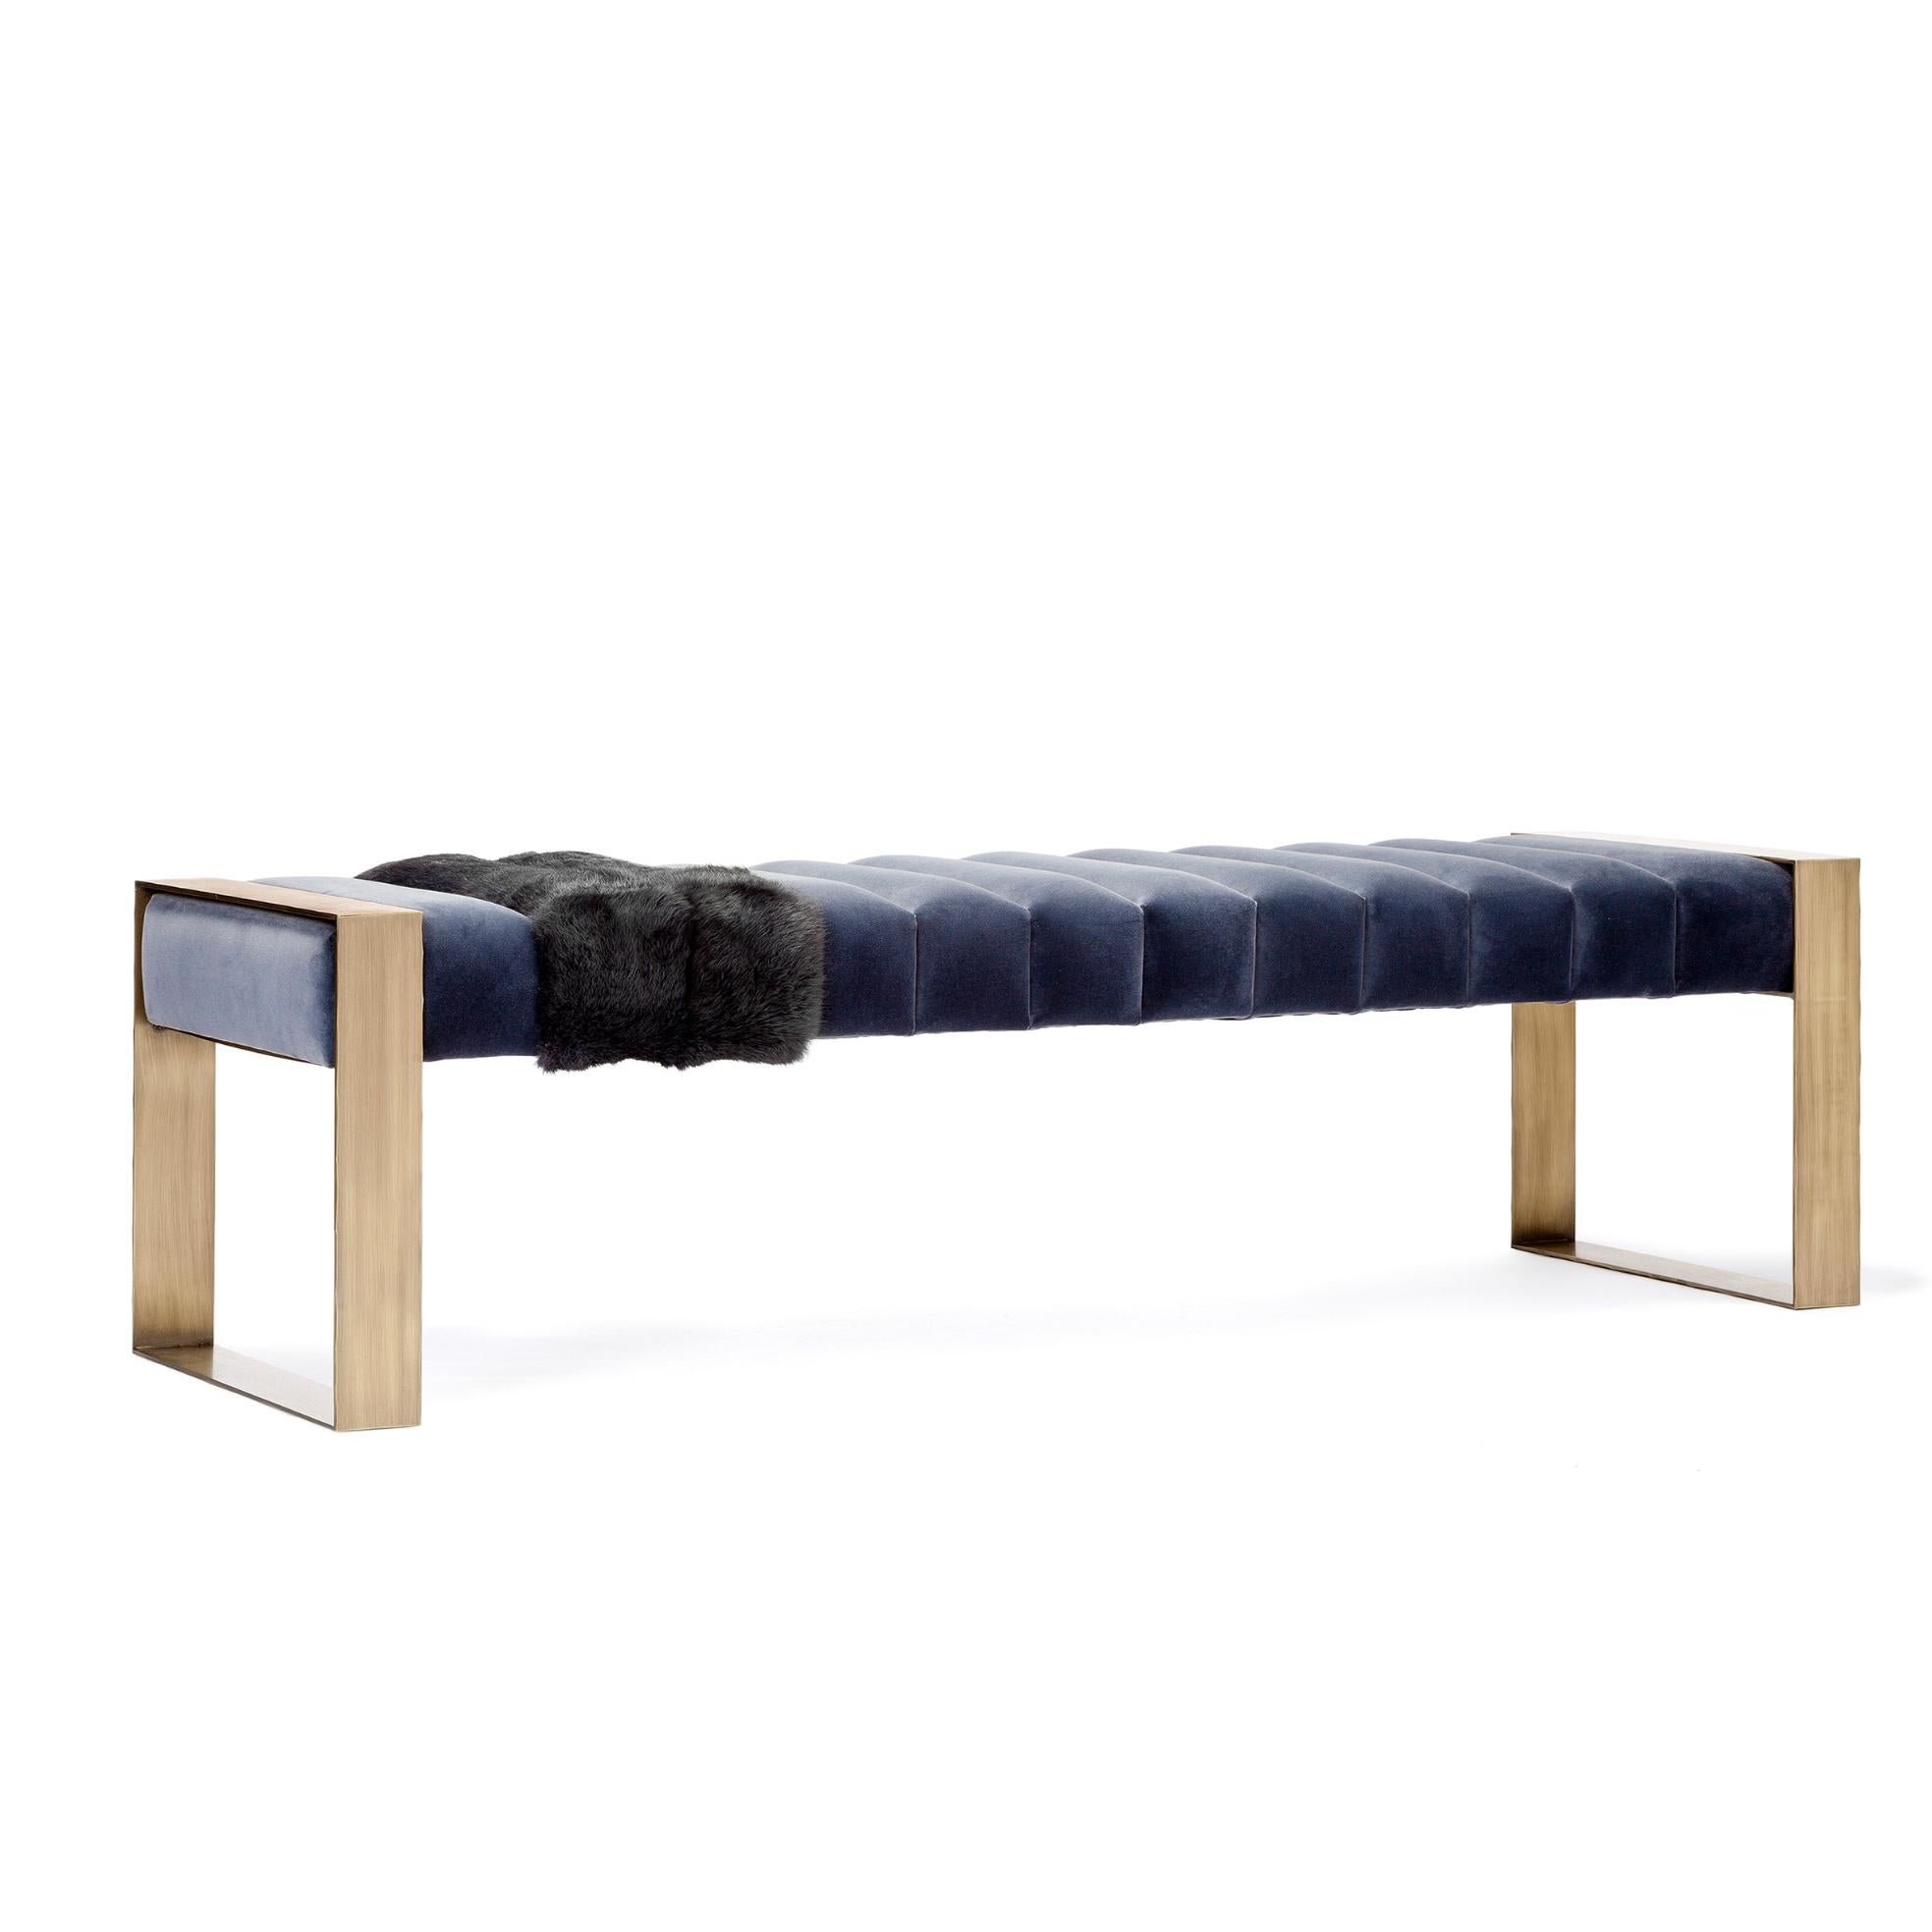 Blue Dawn Bench by Duistt
Dimensions: W 160 x D 50 x H 45 cm
Materials: Duistt Fabric, Fur and Brass

The DAWN bench, crafted with great attention to detail, is a statement design piece. The name Dawn is inspired by the pieces clear horizontal lines